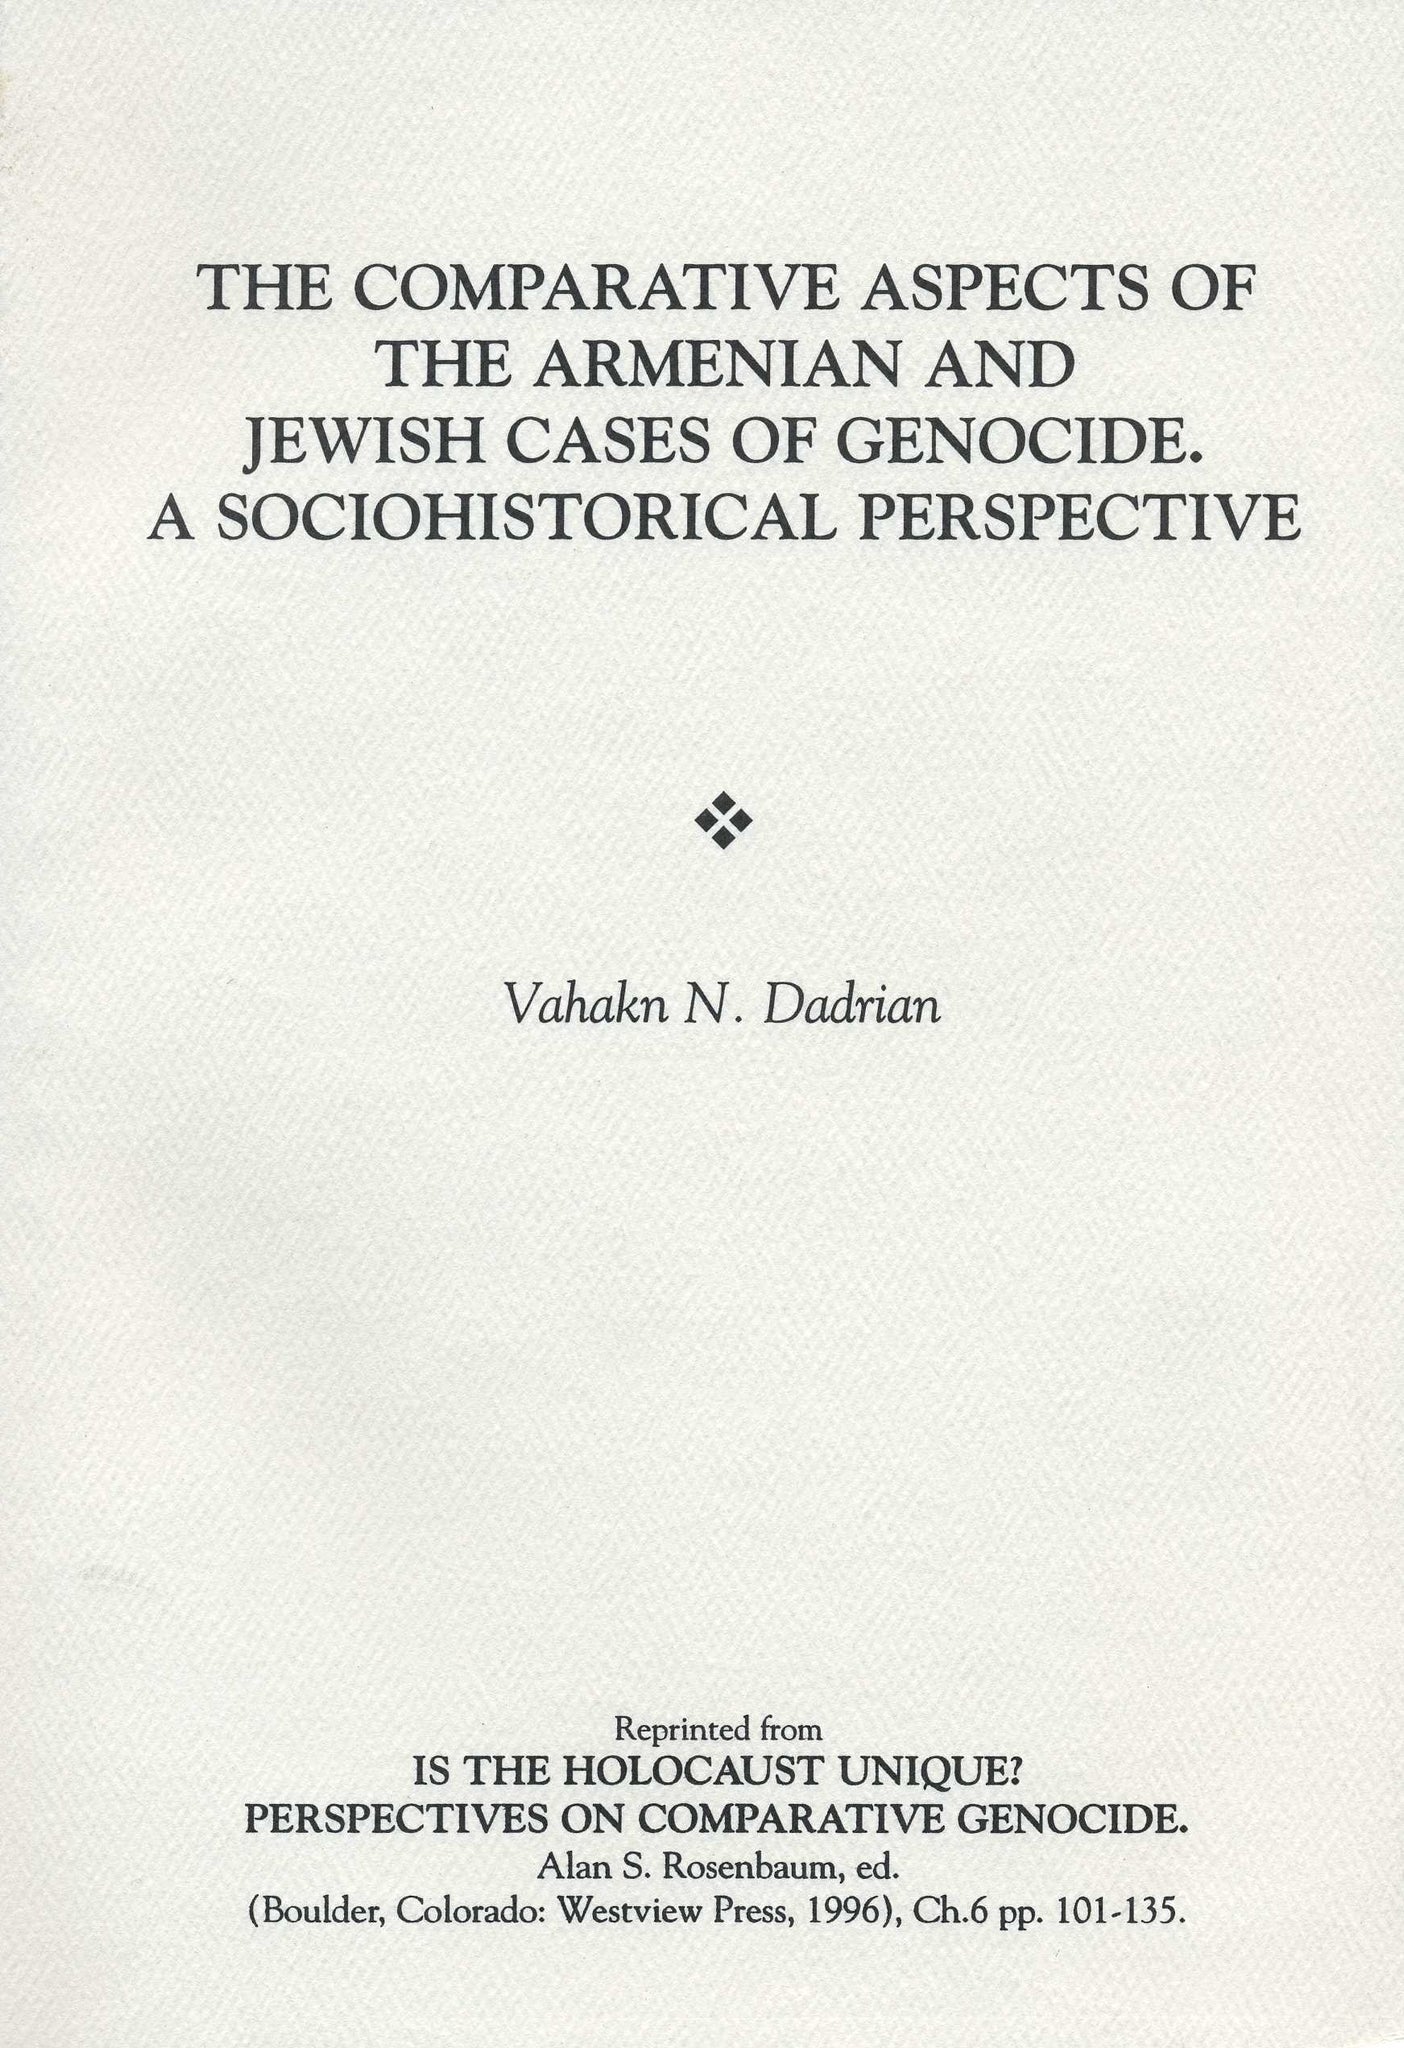 Comparative Aspects of the Armenian and Jewish Cases of Genocide, A Sociohistorical Perspective